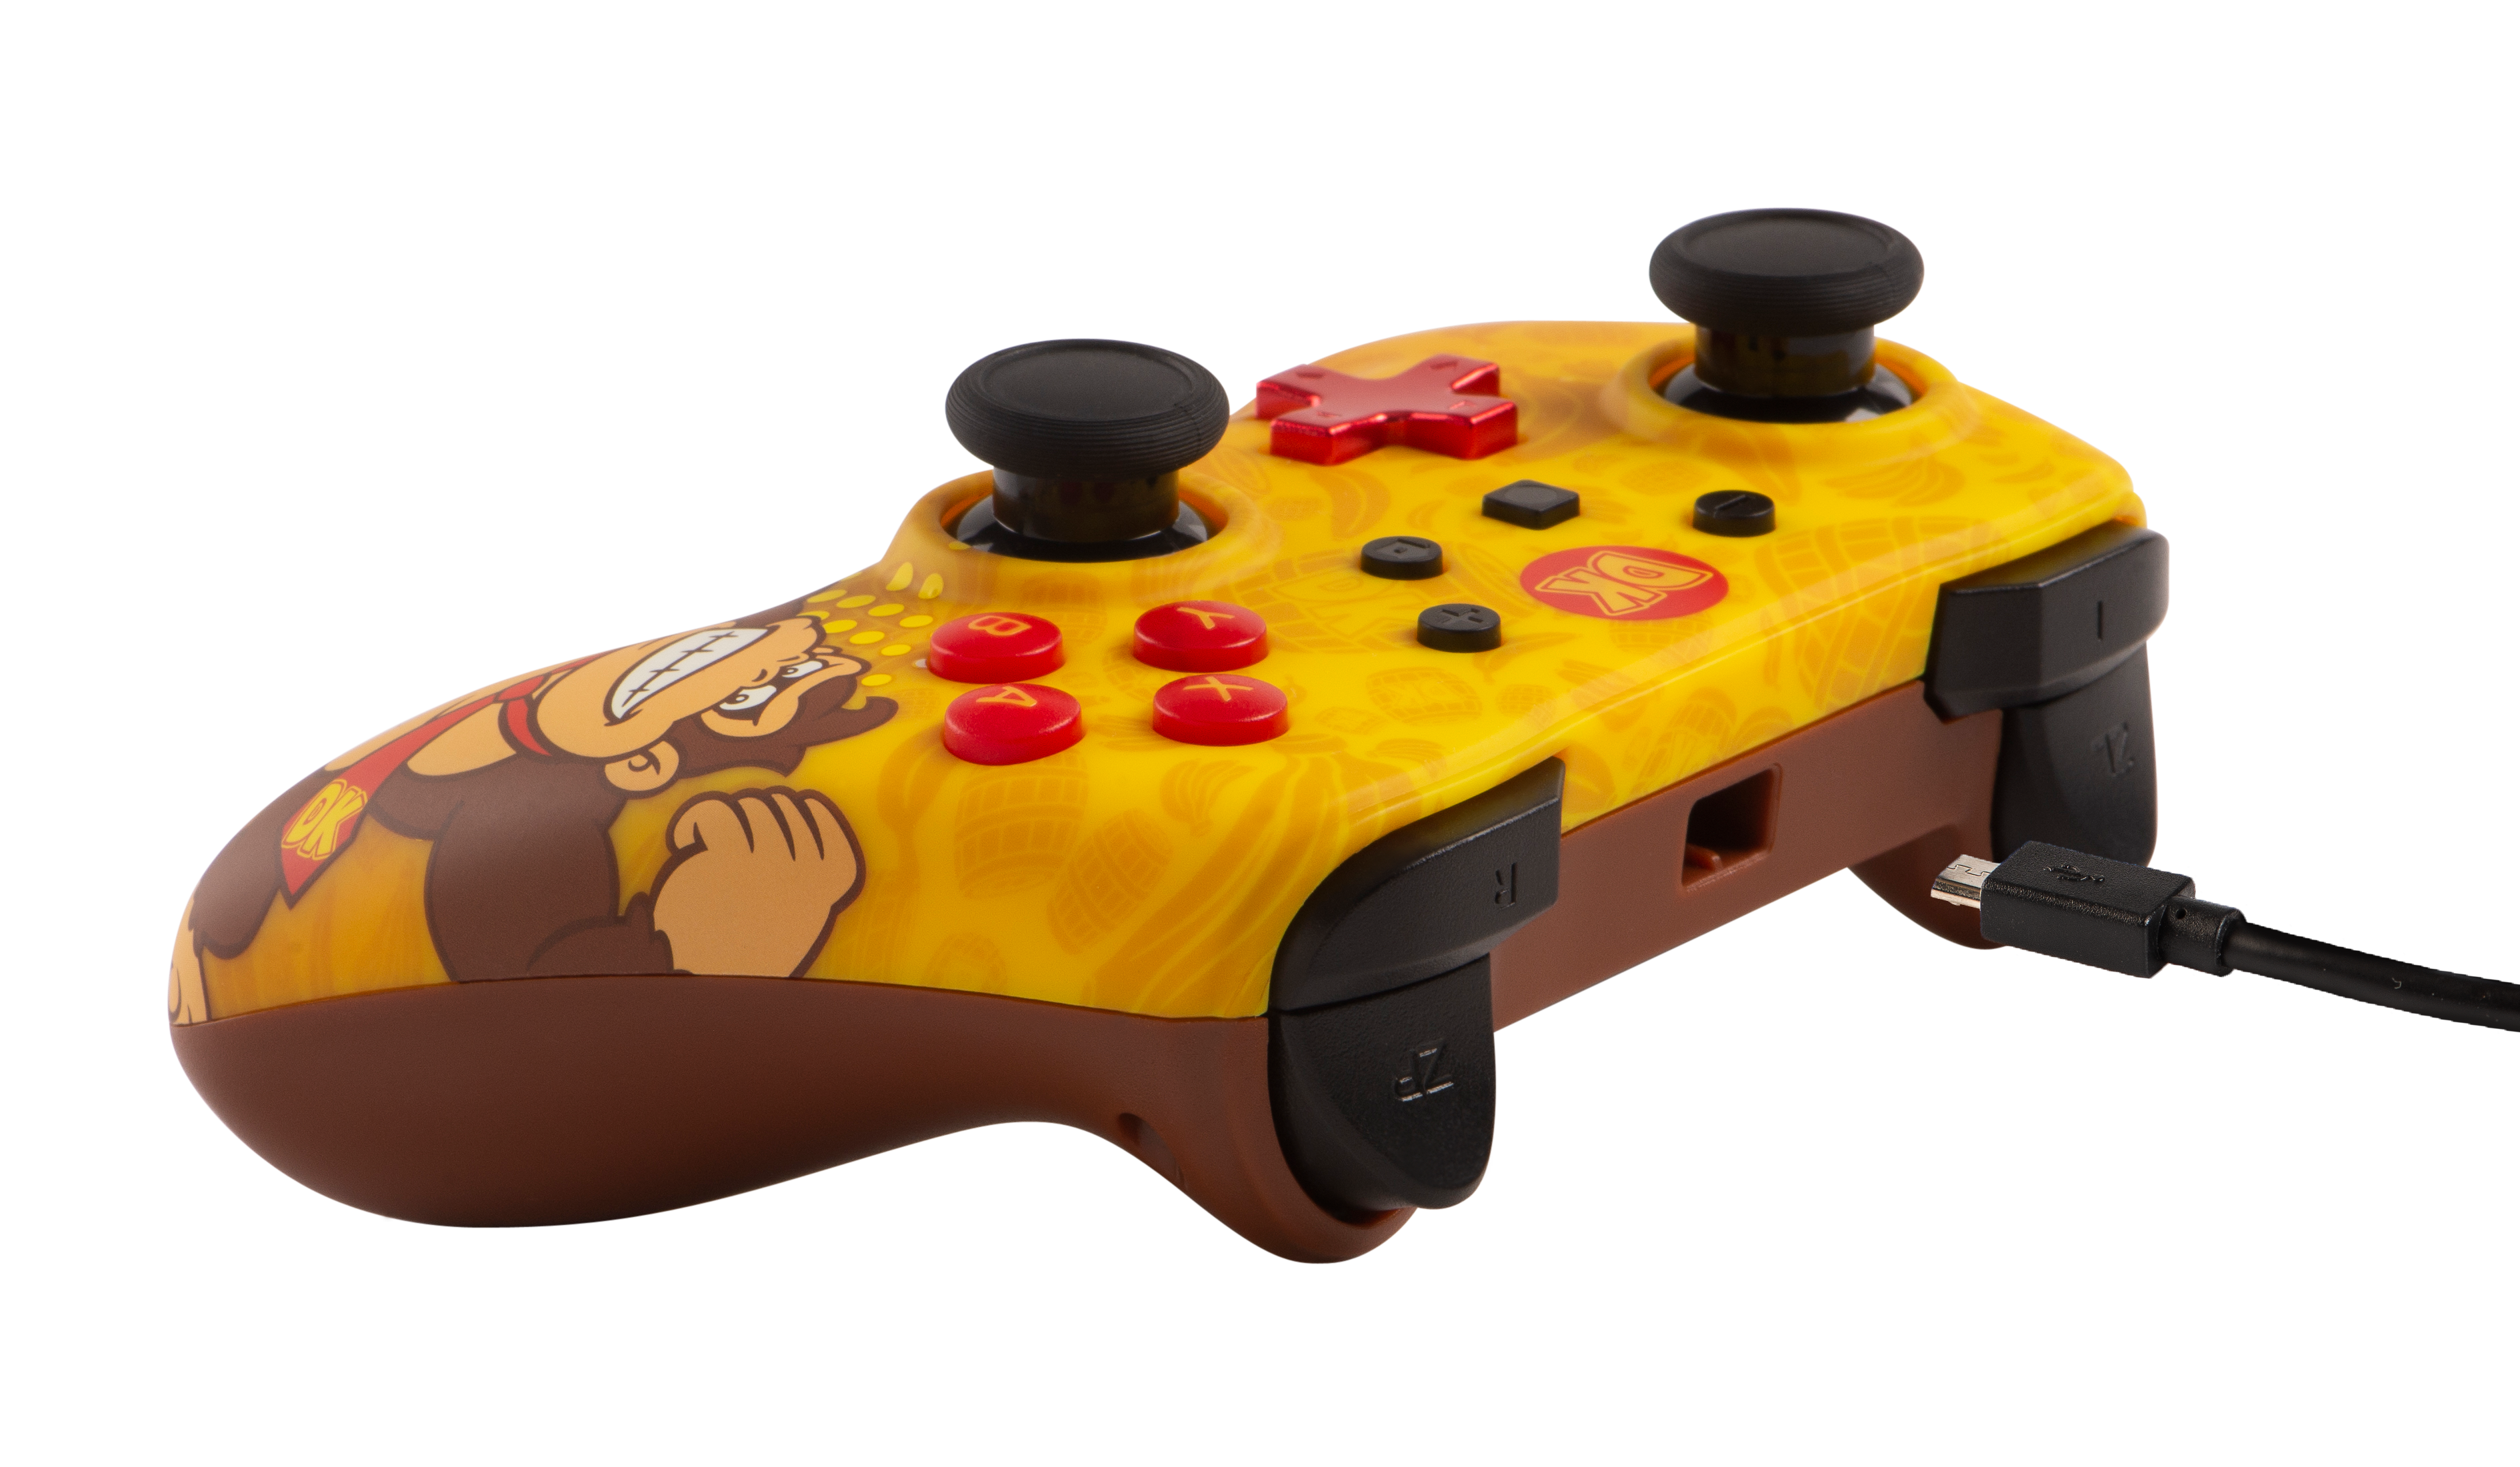 PowerA Enhanced Wired Controller for Nintendo Switch Donkey Kong